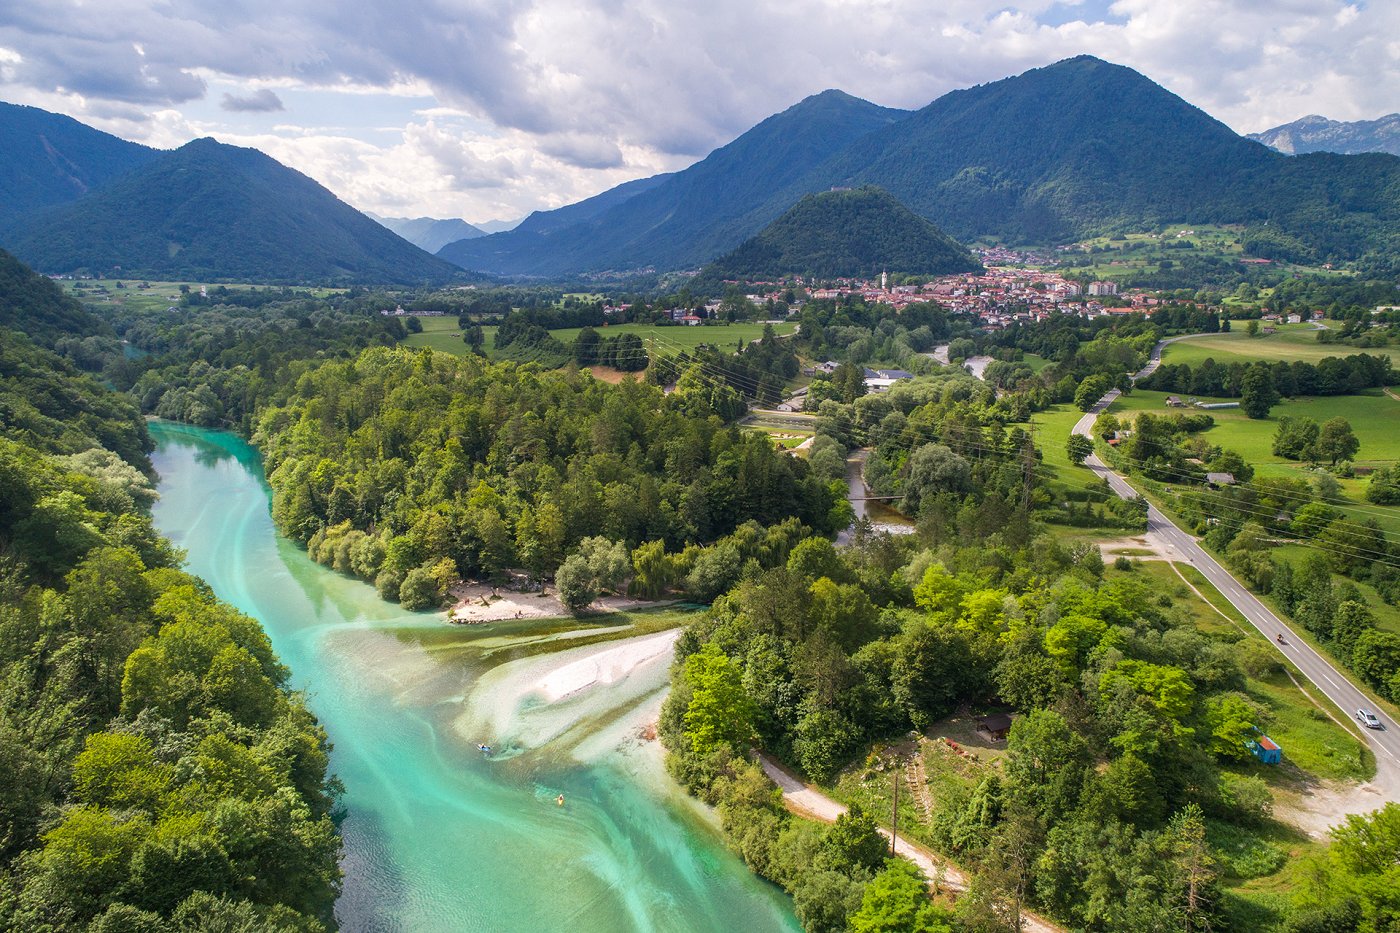 View of the confluence of the Soča and Tolminka rivers, in the background the town of Tolmin and the local mountains